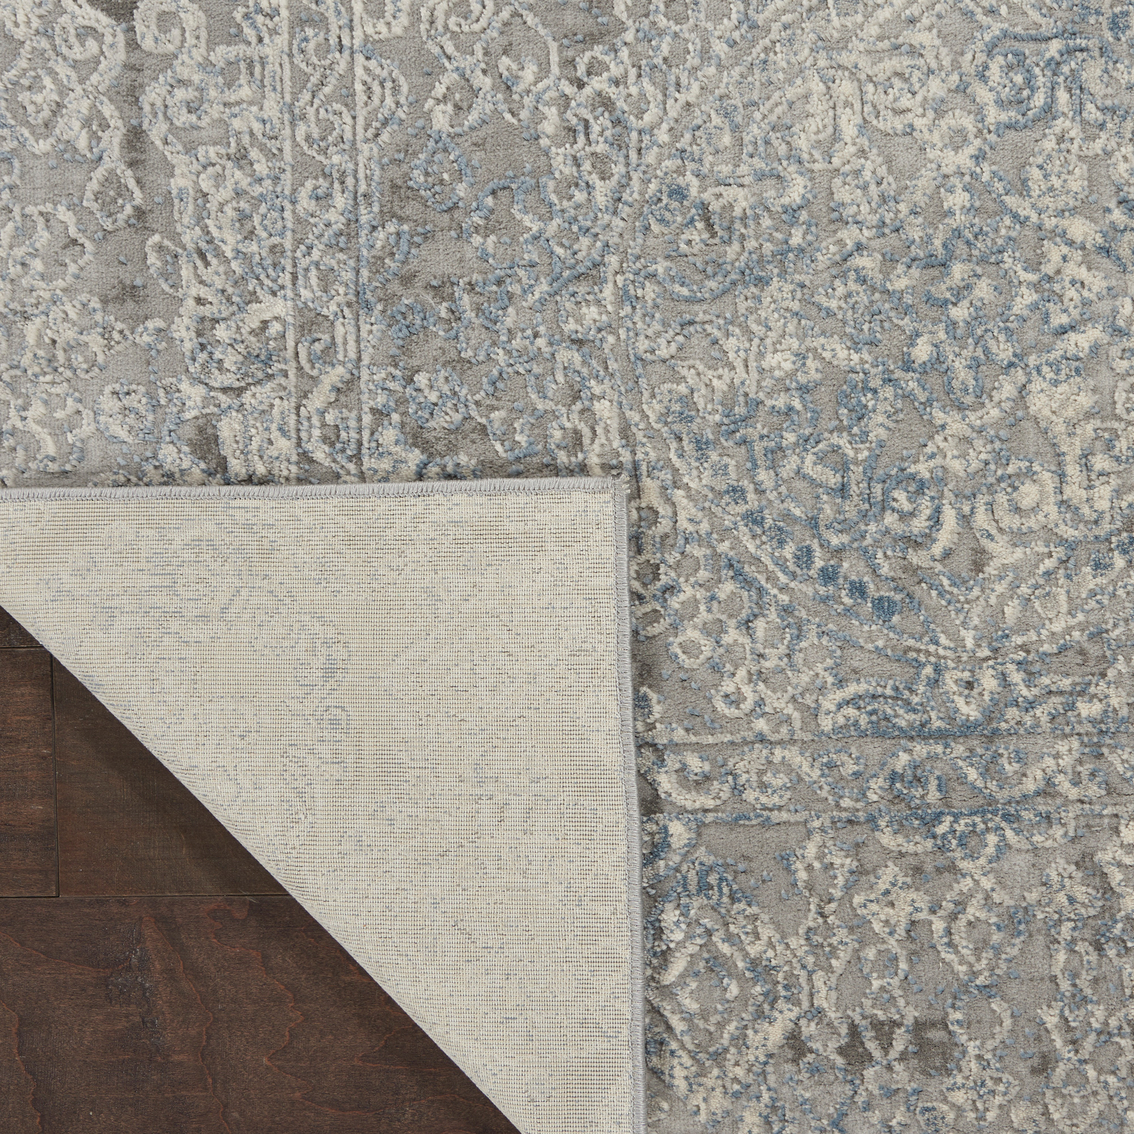 Nourison Rustic Textures Collection Abstract Rug - Image 7 of 9